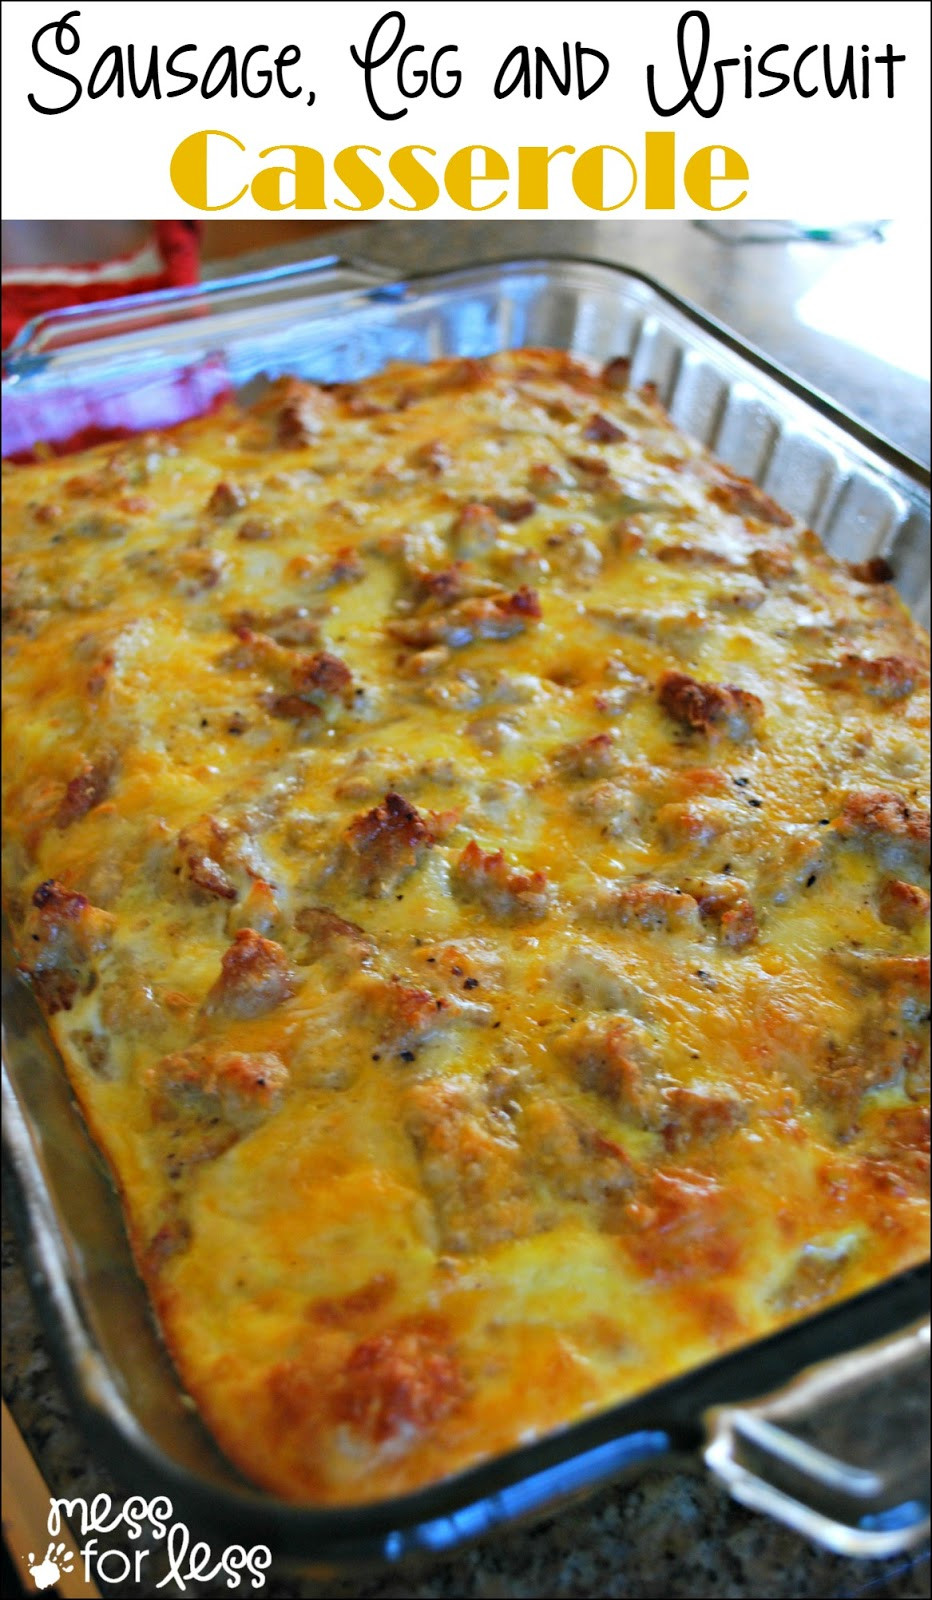 Sausage And Biscuit Casserole
 The BEST Sausage Egg and Biscuit Breakfast Casserole